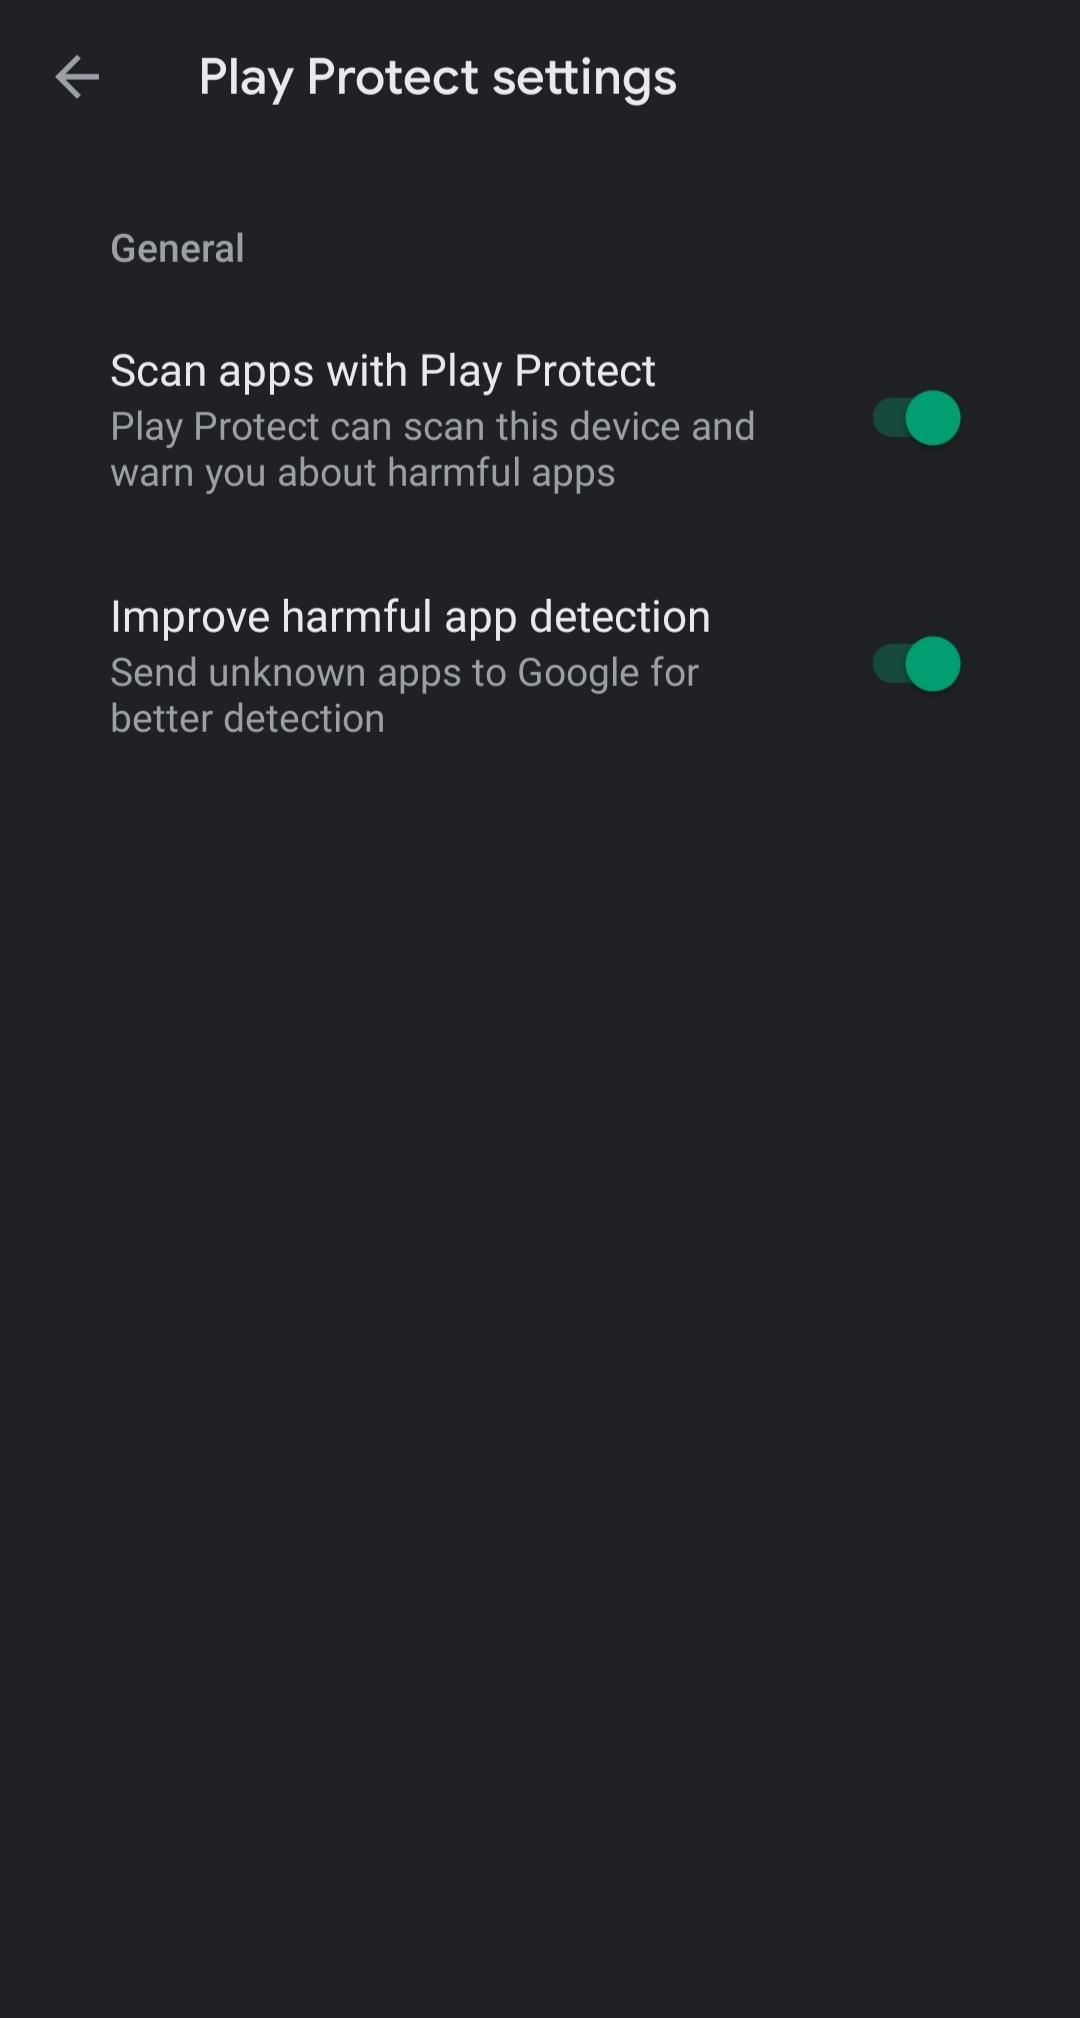 How To Check If An App Is Safe To Install?